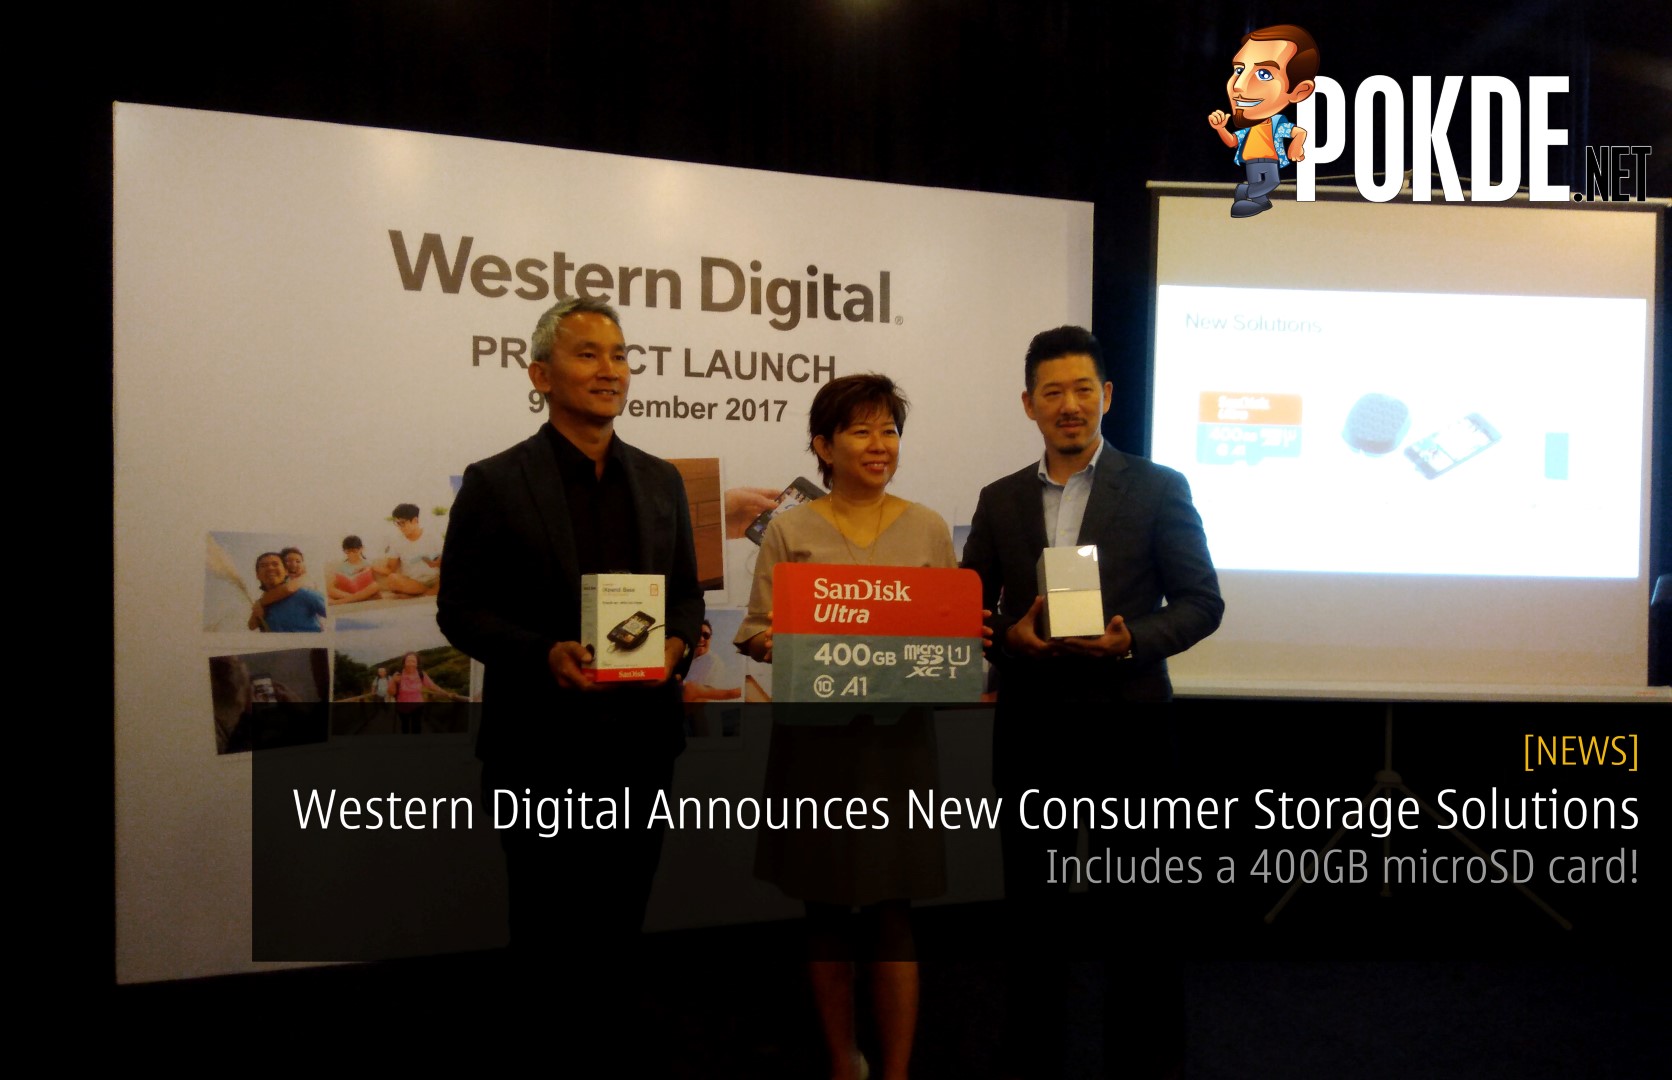 Western Digital Announces New Consumer Storage Solutions - Includes a 400GB microSD card! 23